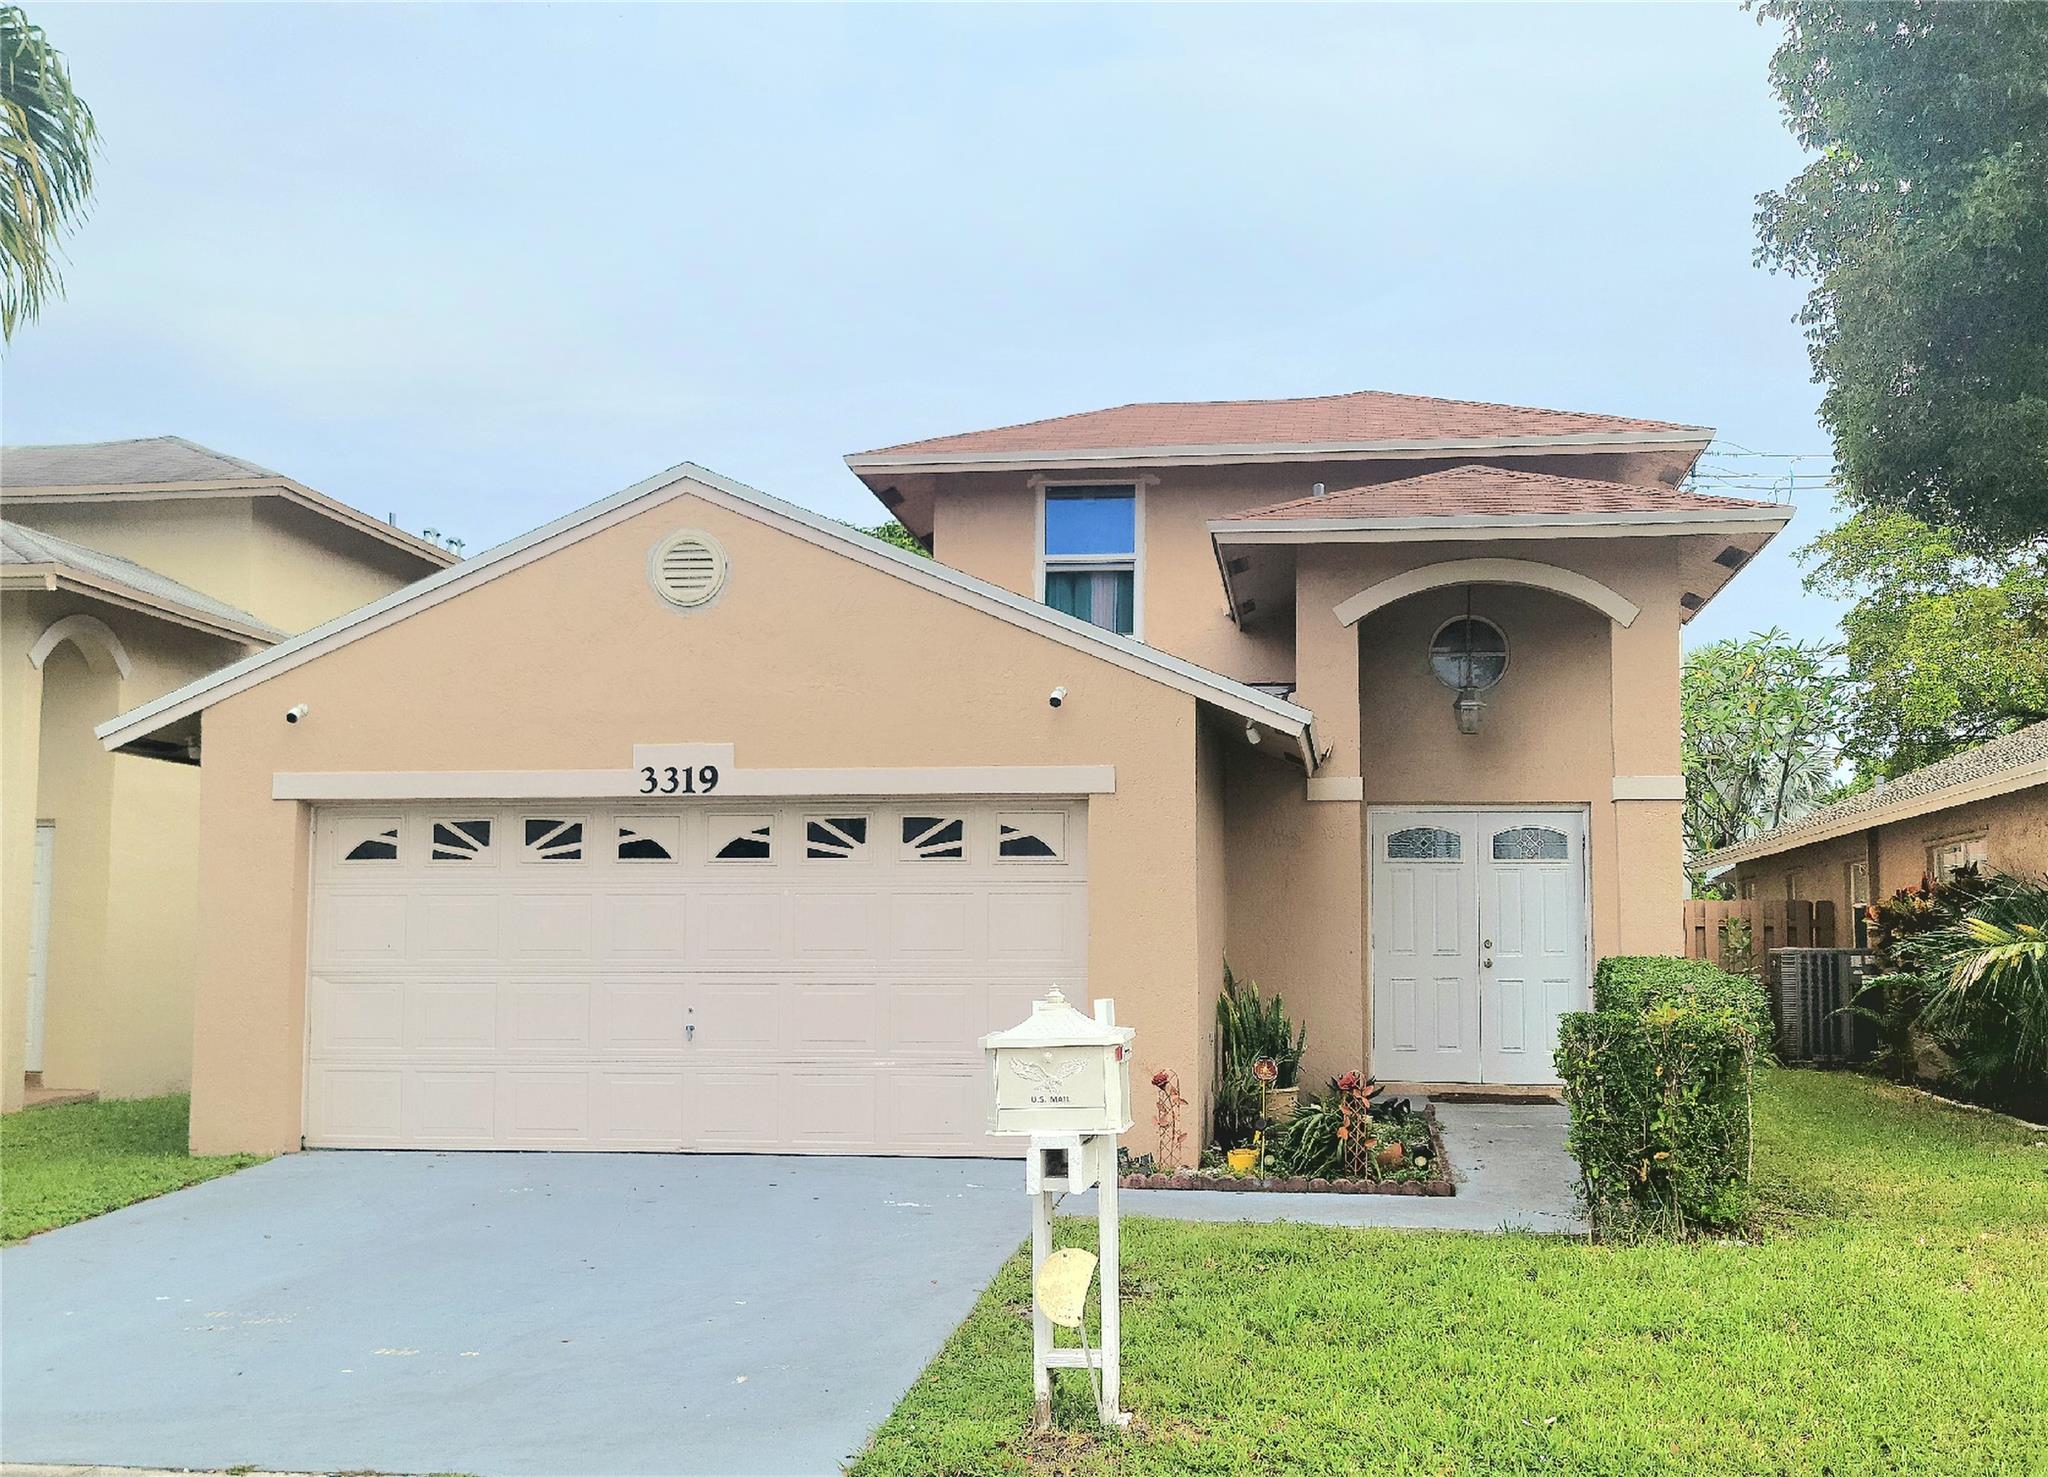 3319 NW 23rd court, Coconut Creek, FL 33066